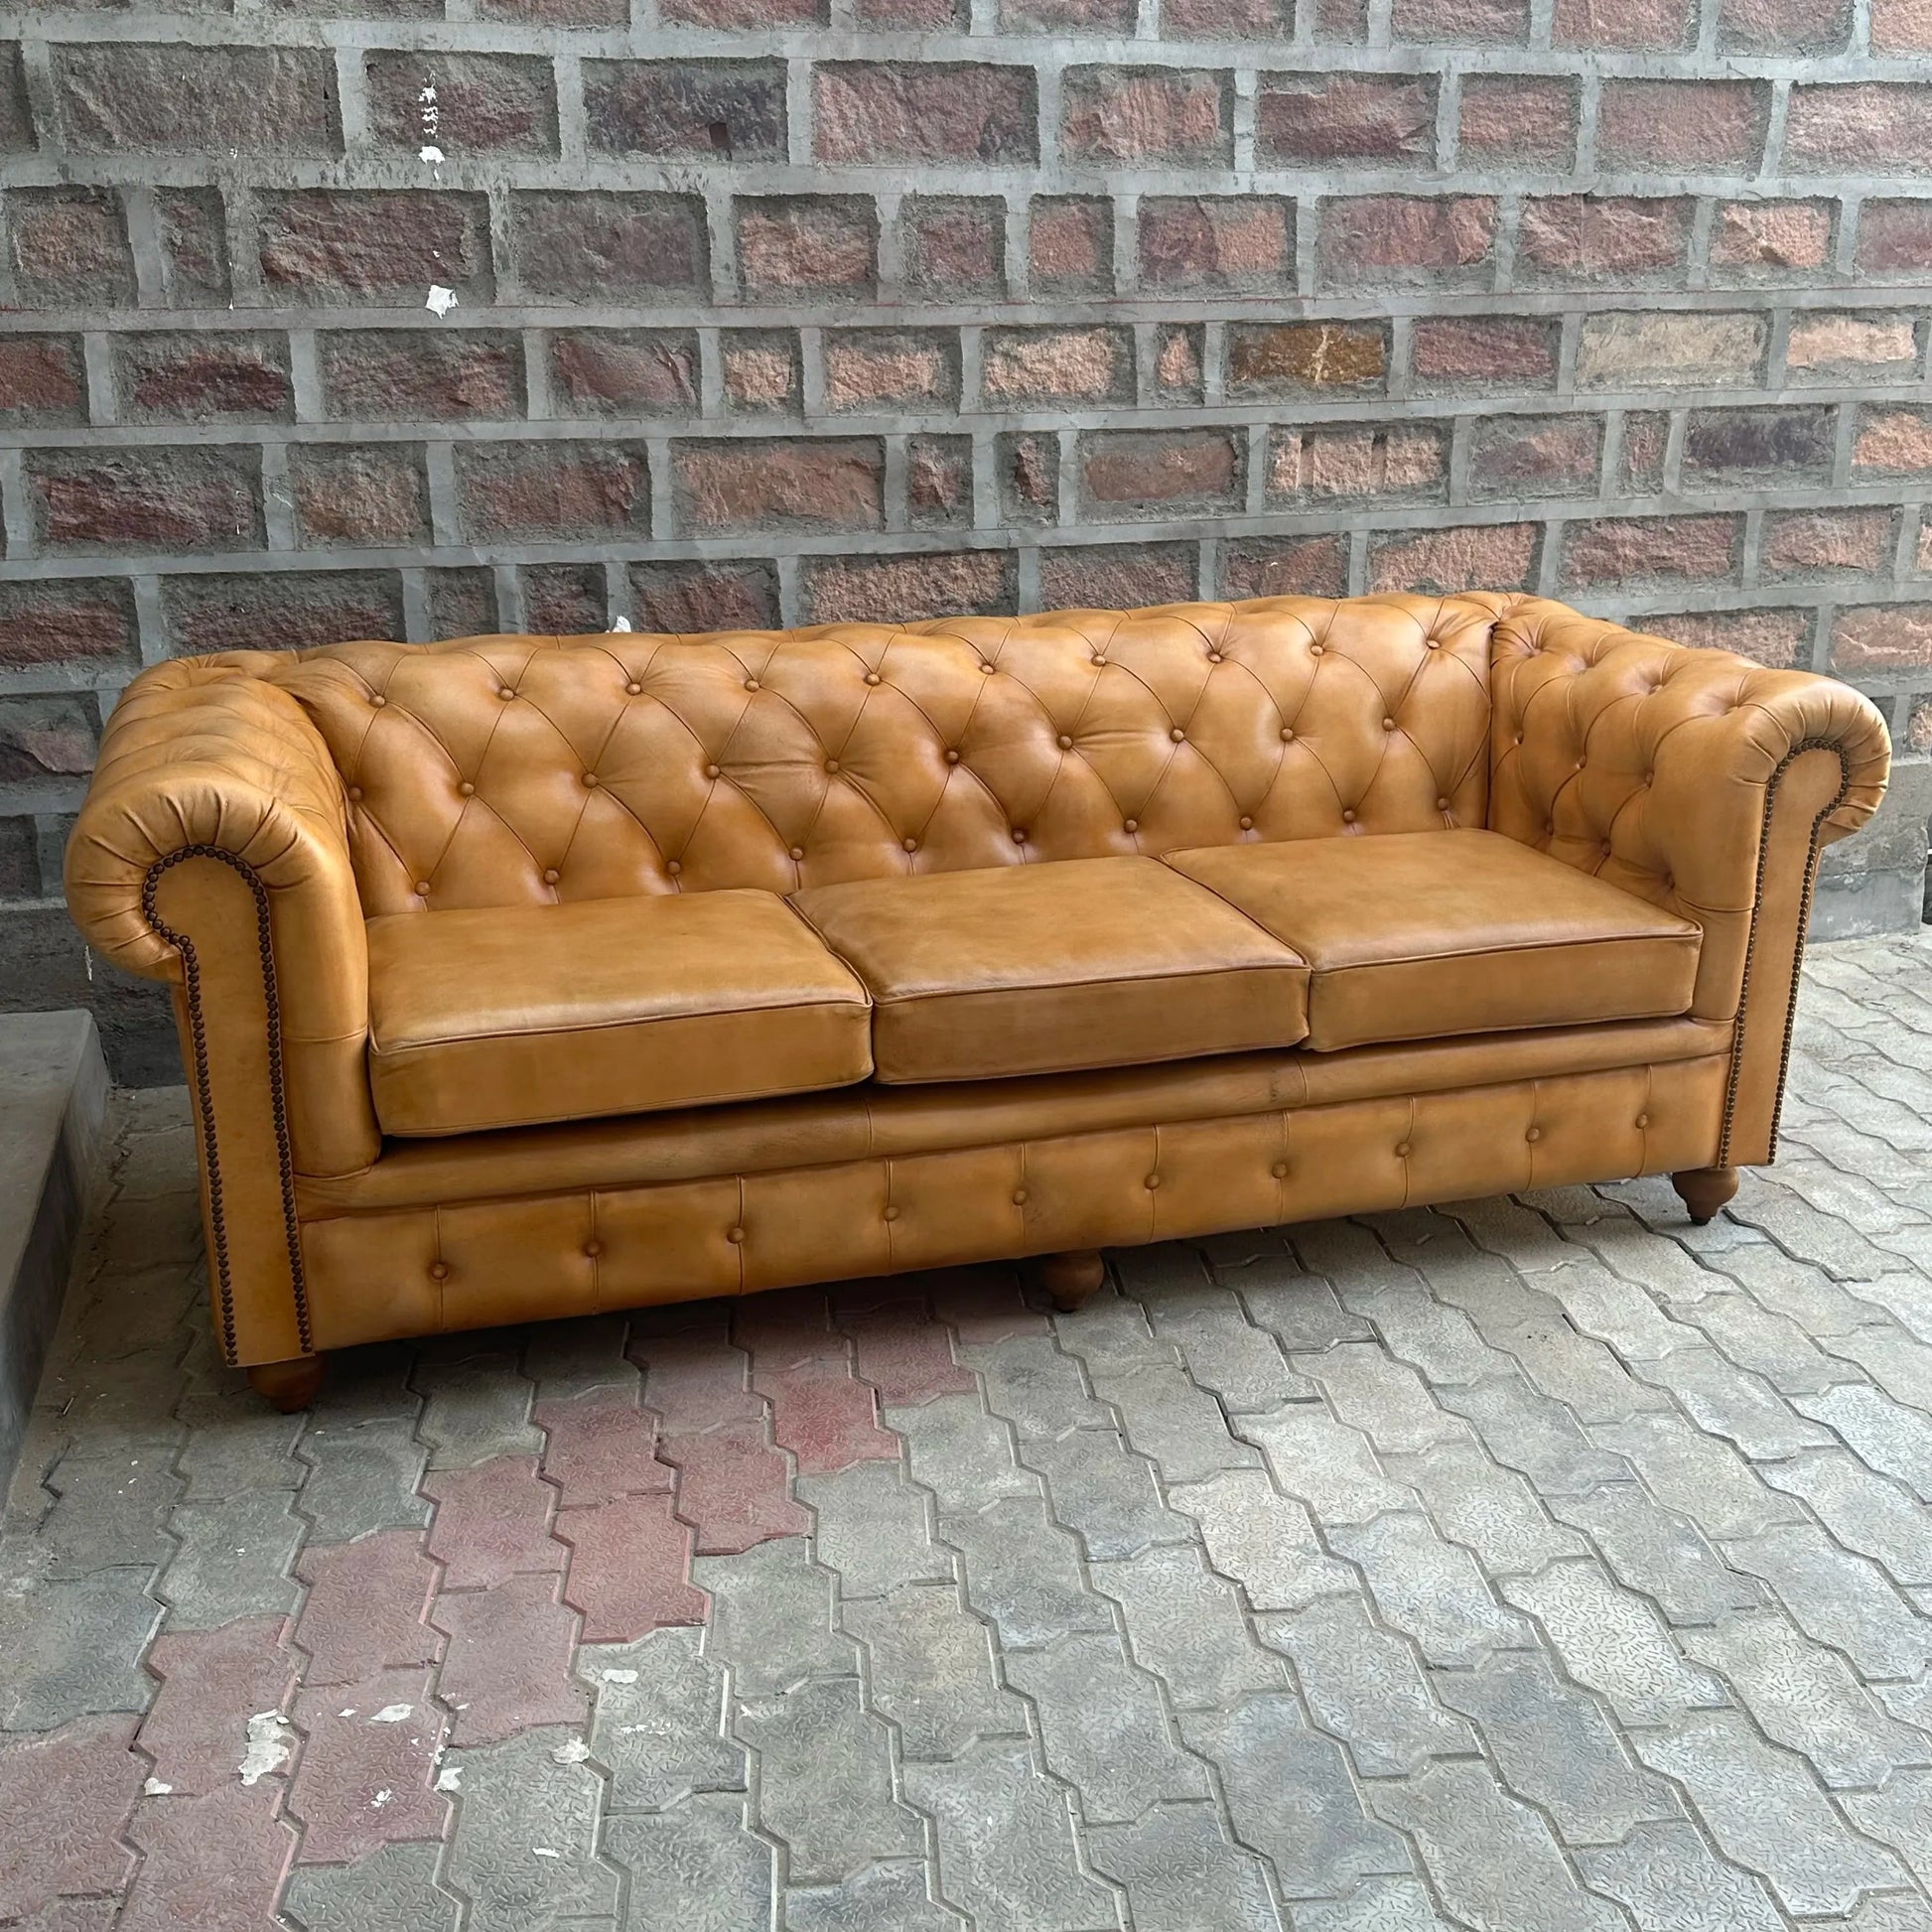 Record Fern Money rubber Cheyenne Chesterfield Leather Sofa | The Rising Tide Design Co